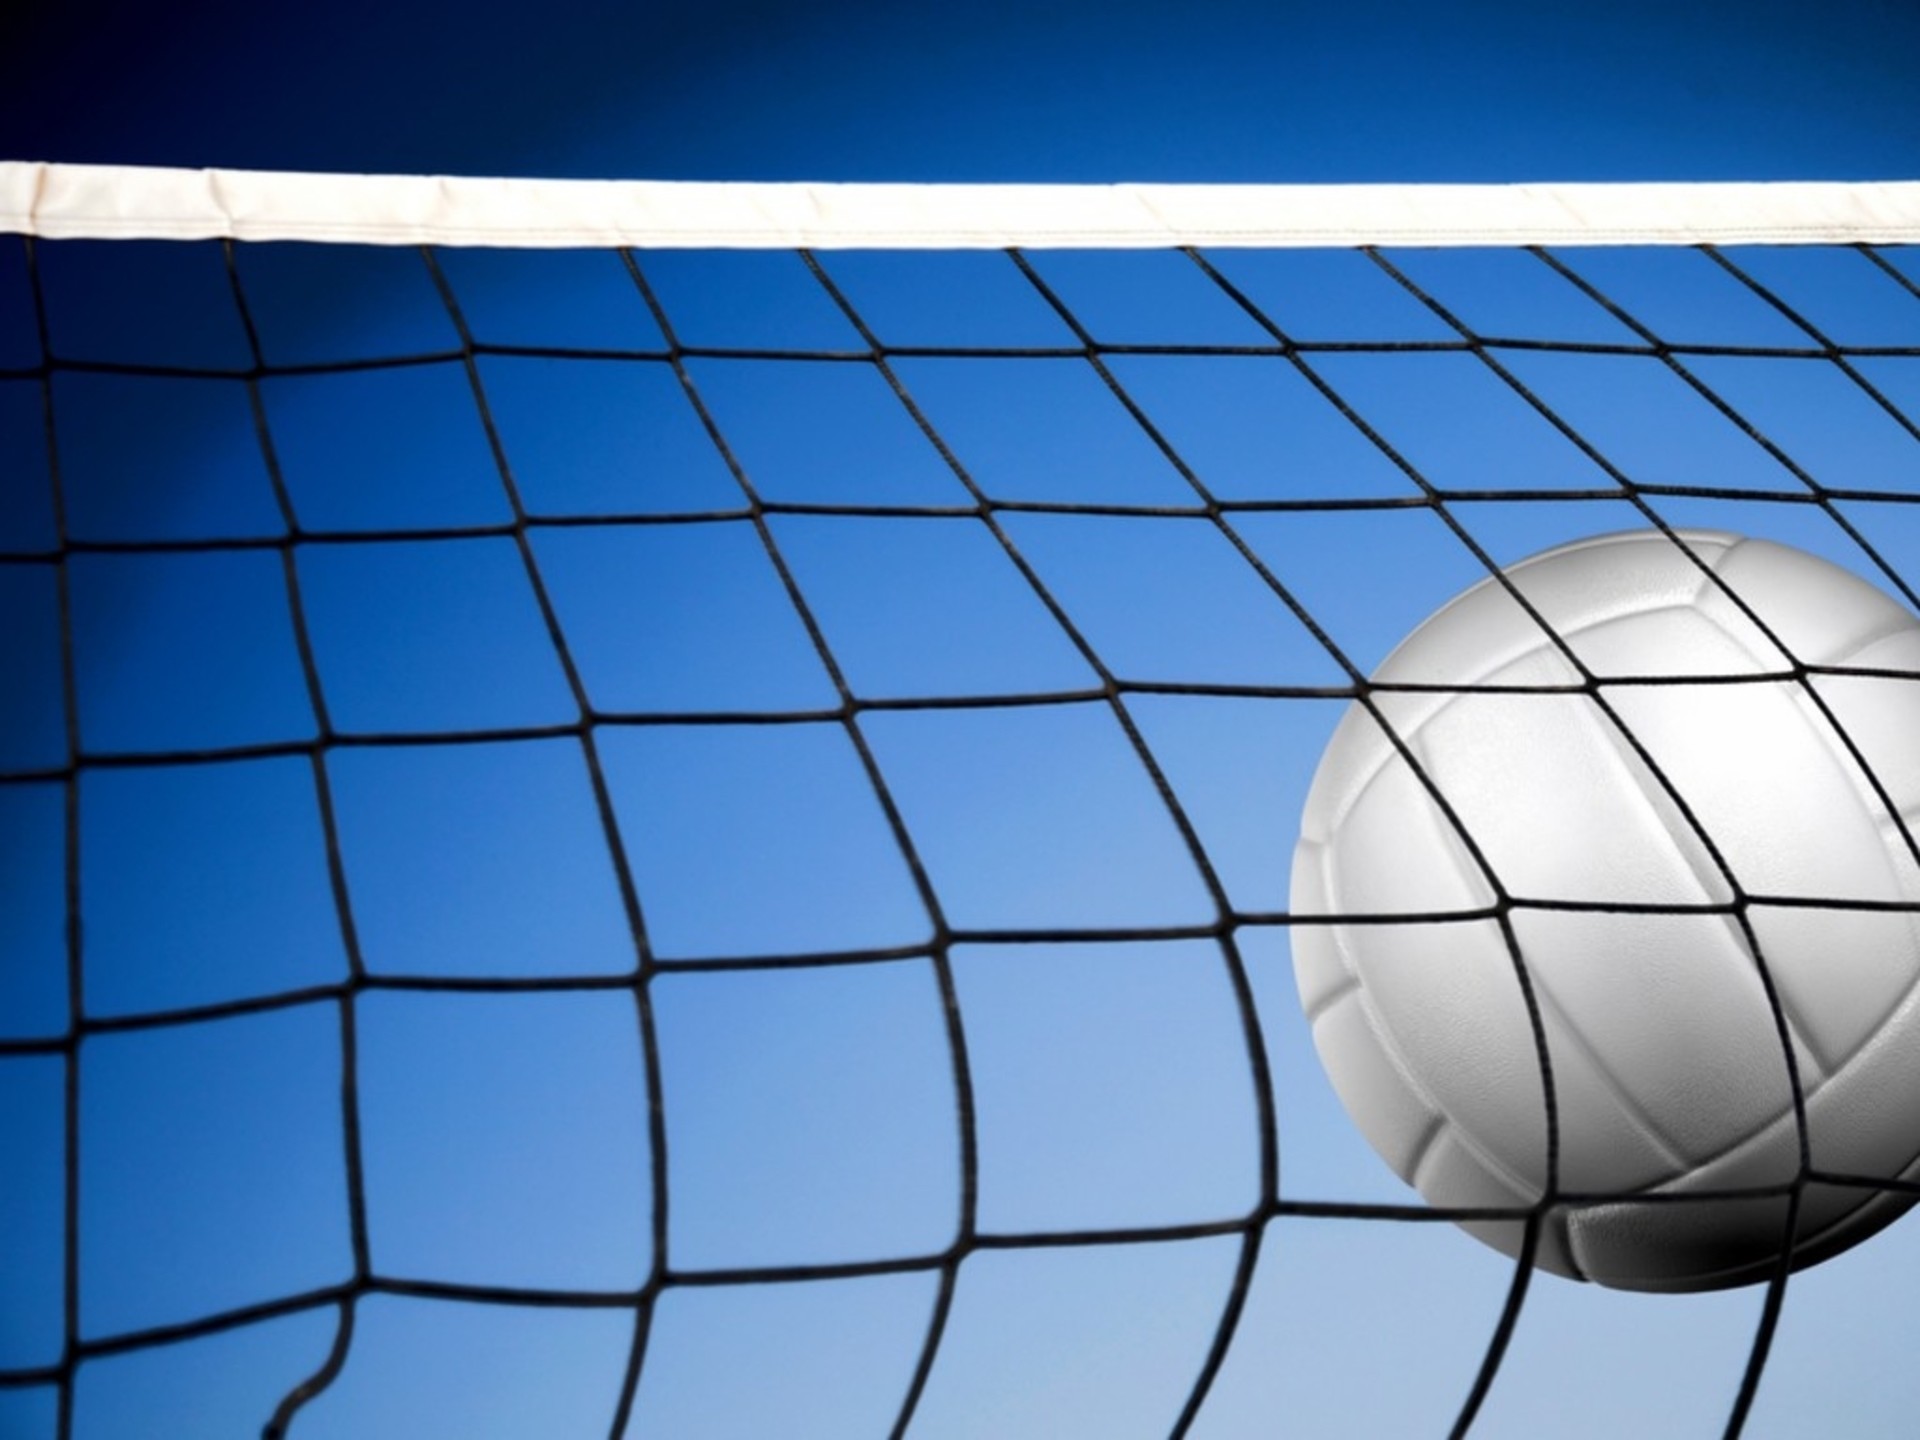 Aggregate more than 71 volleyball images hd wallpapers - 3tdesign.edu.vn